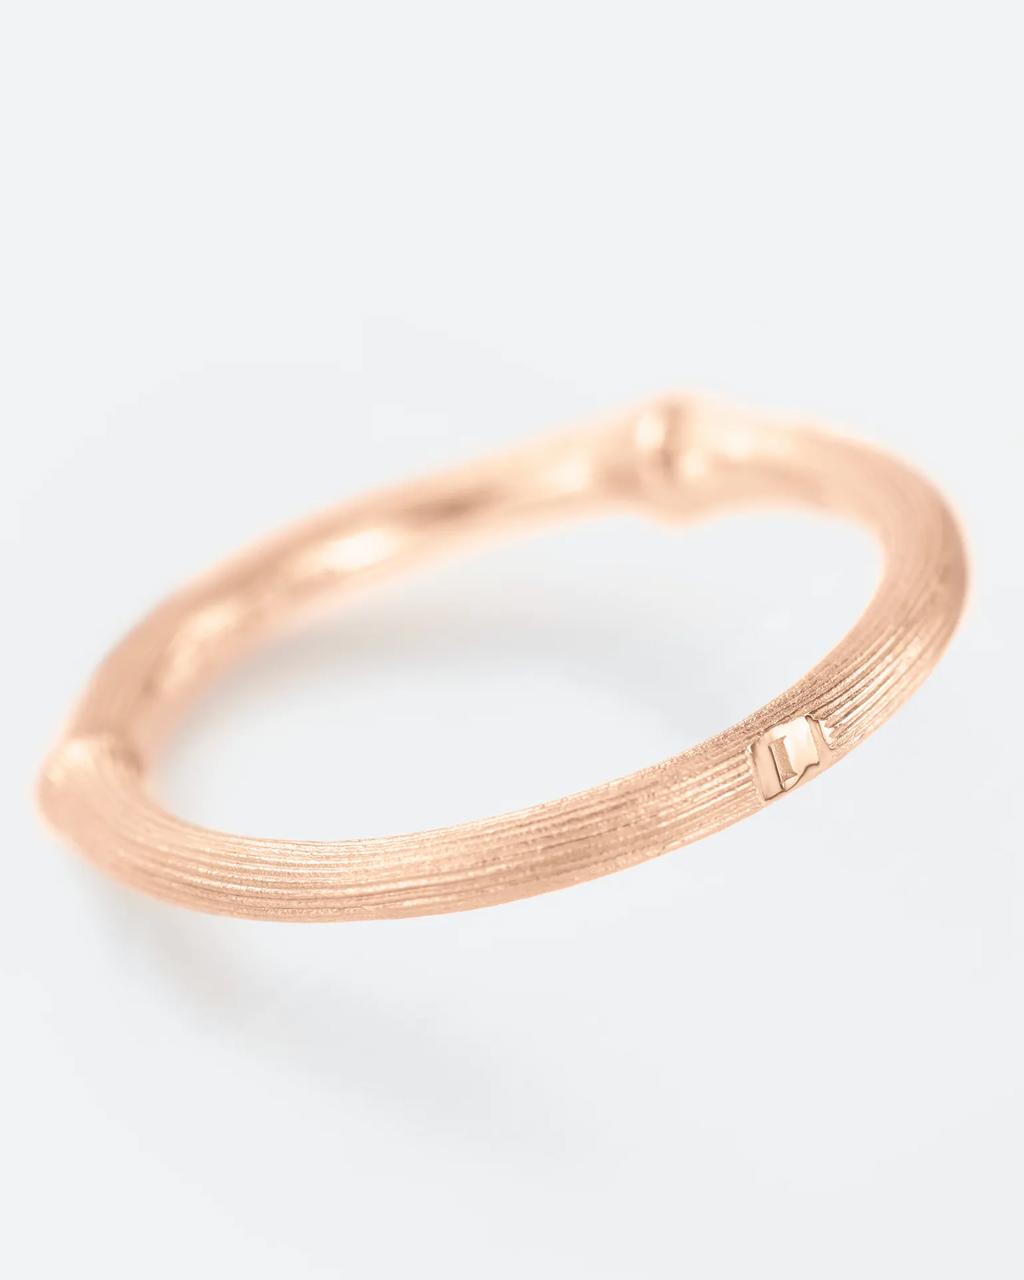 Ole Lynggaard 'Nature' Rose Gold Ring - Size 1